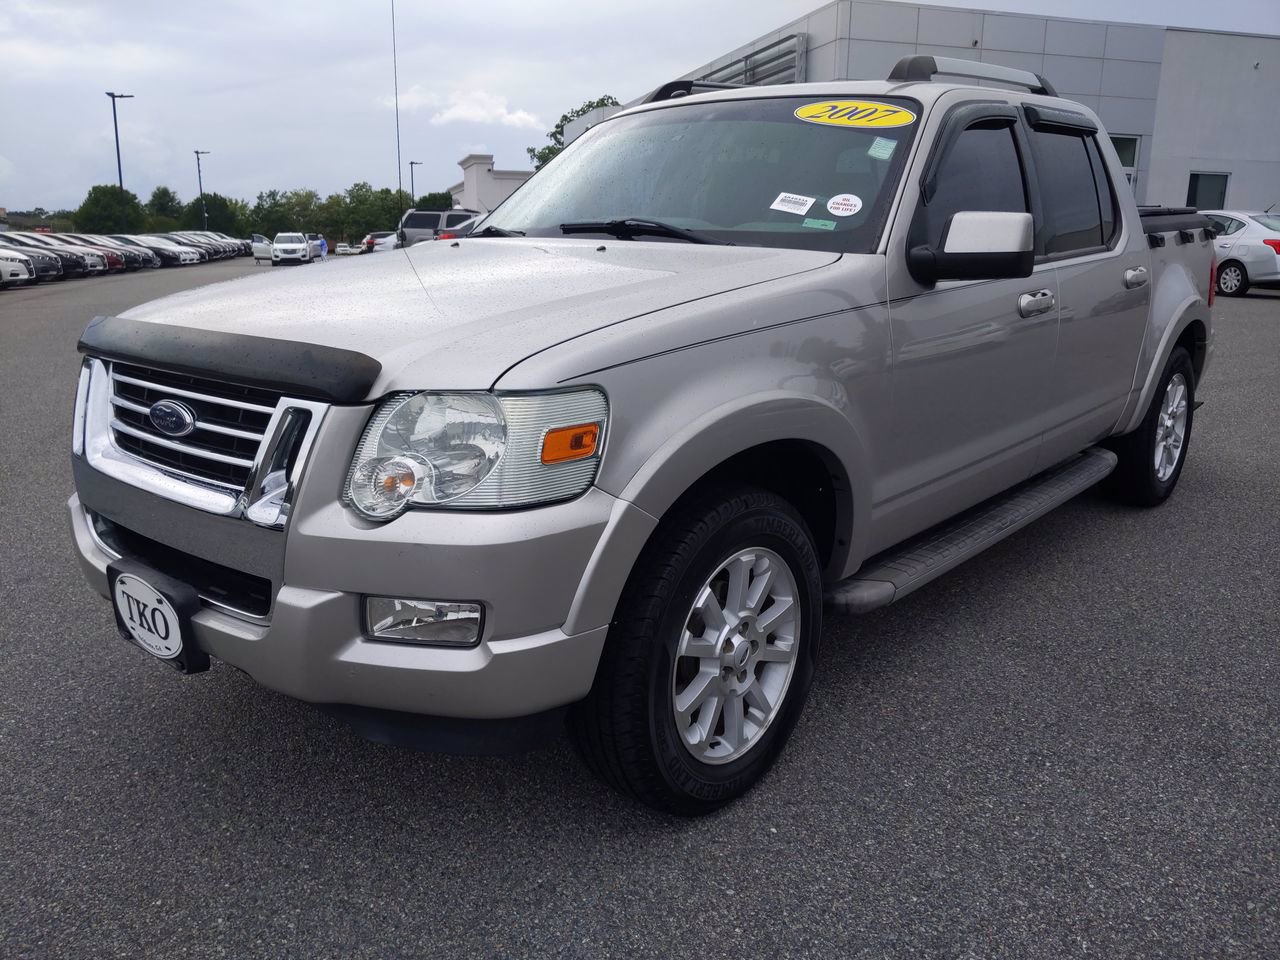 Pre-Owned 2007 Ford Explorer Sport Trac Limited Sport Utility in